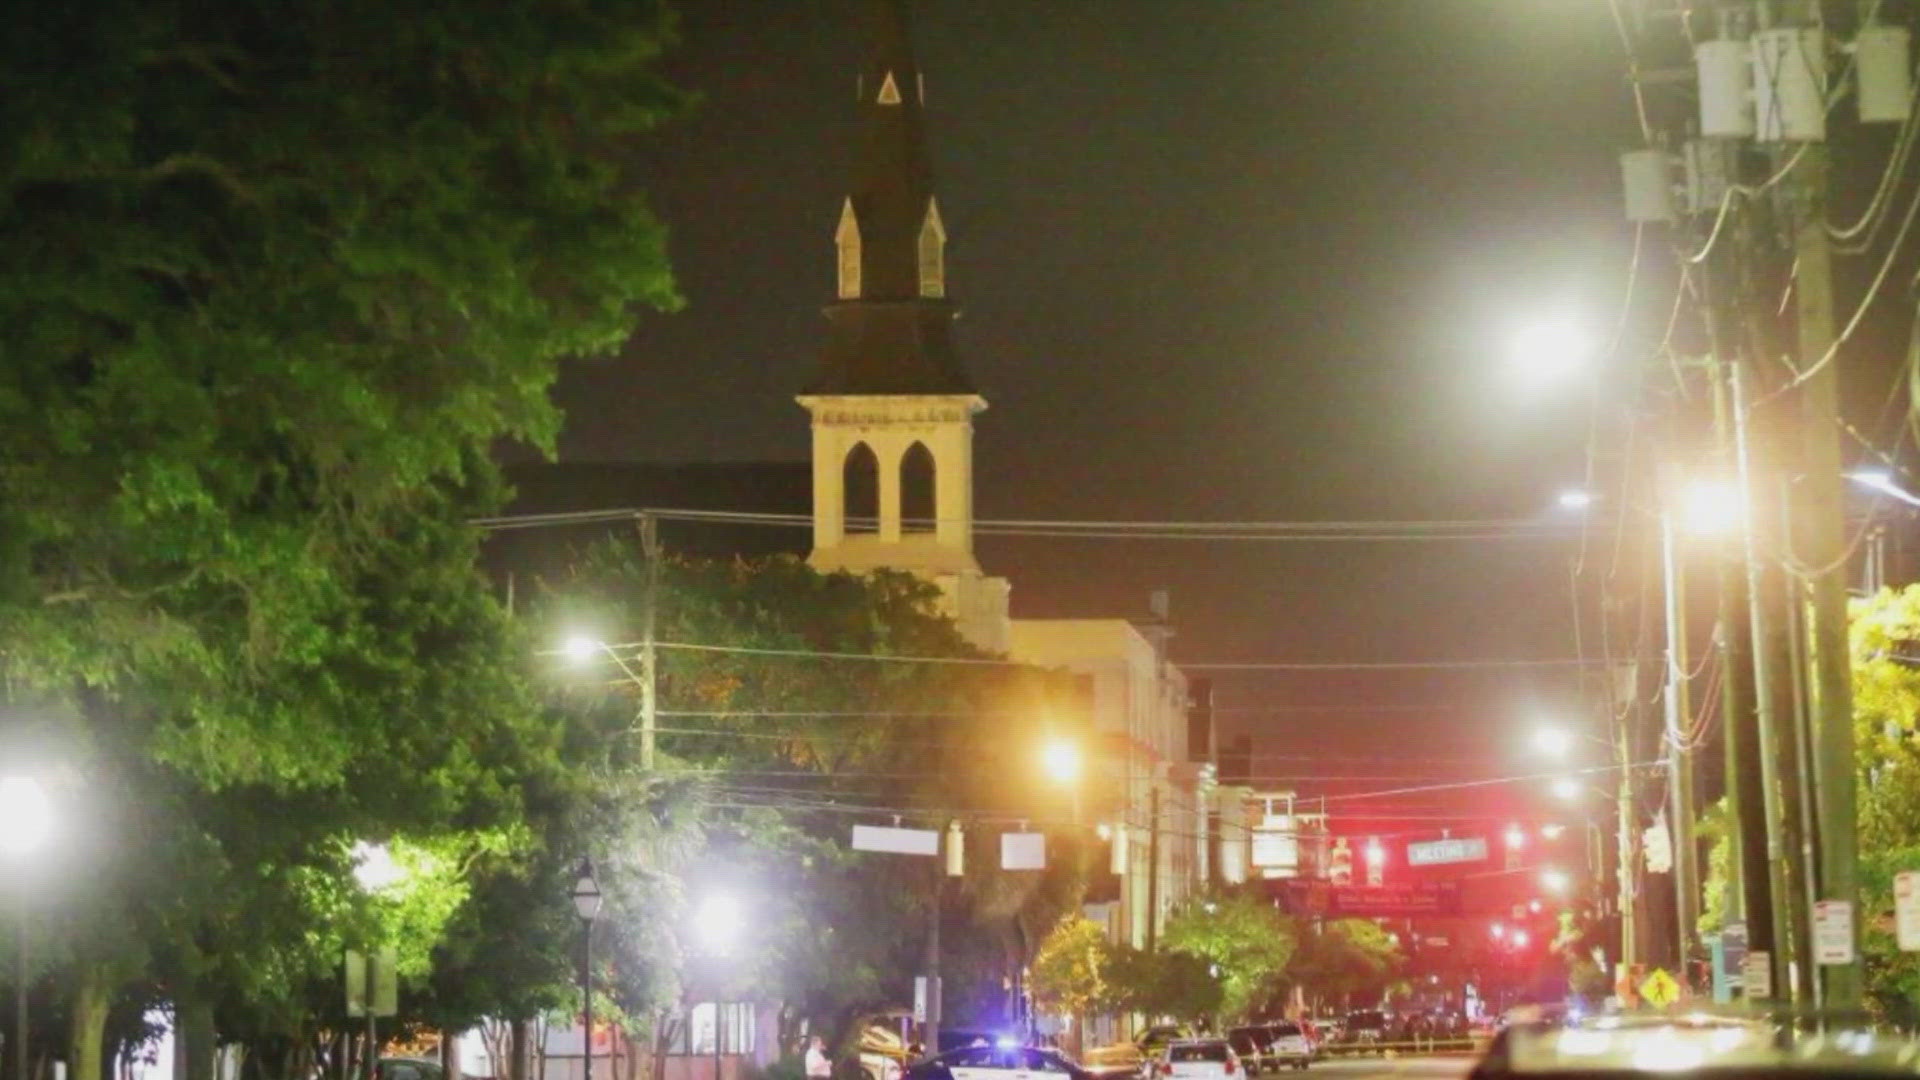 During bible study, a man opened fire, shooting and killing nine people in Charleston, South Carolina.